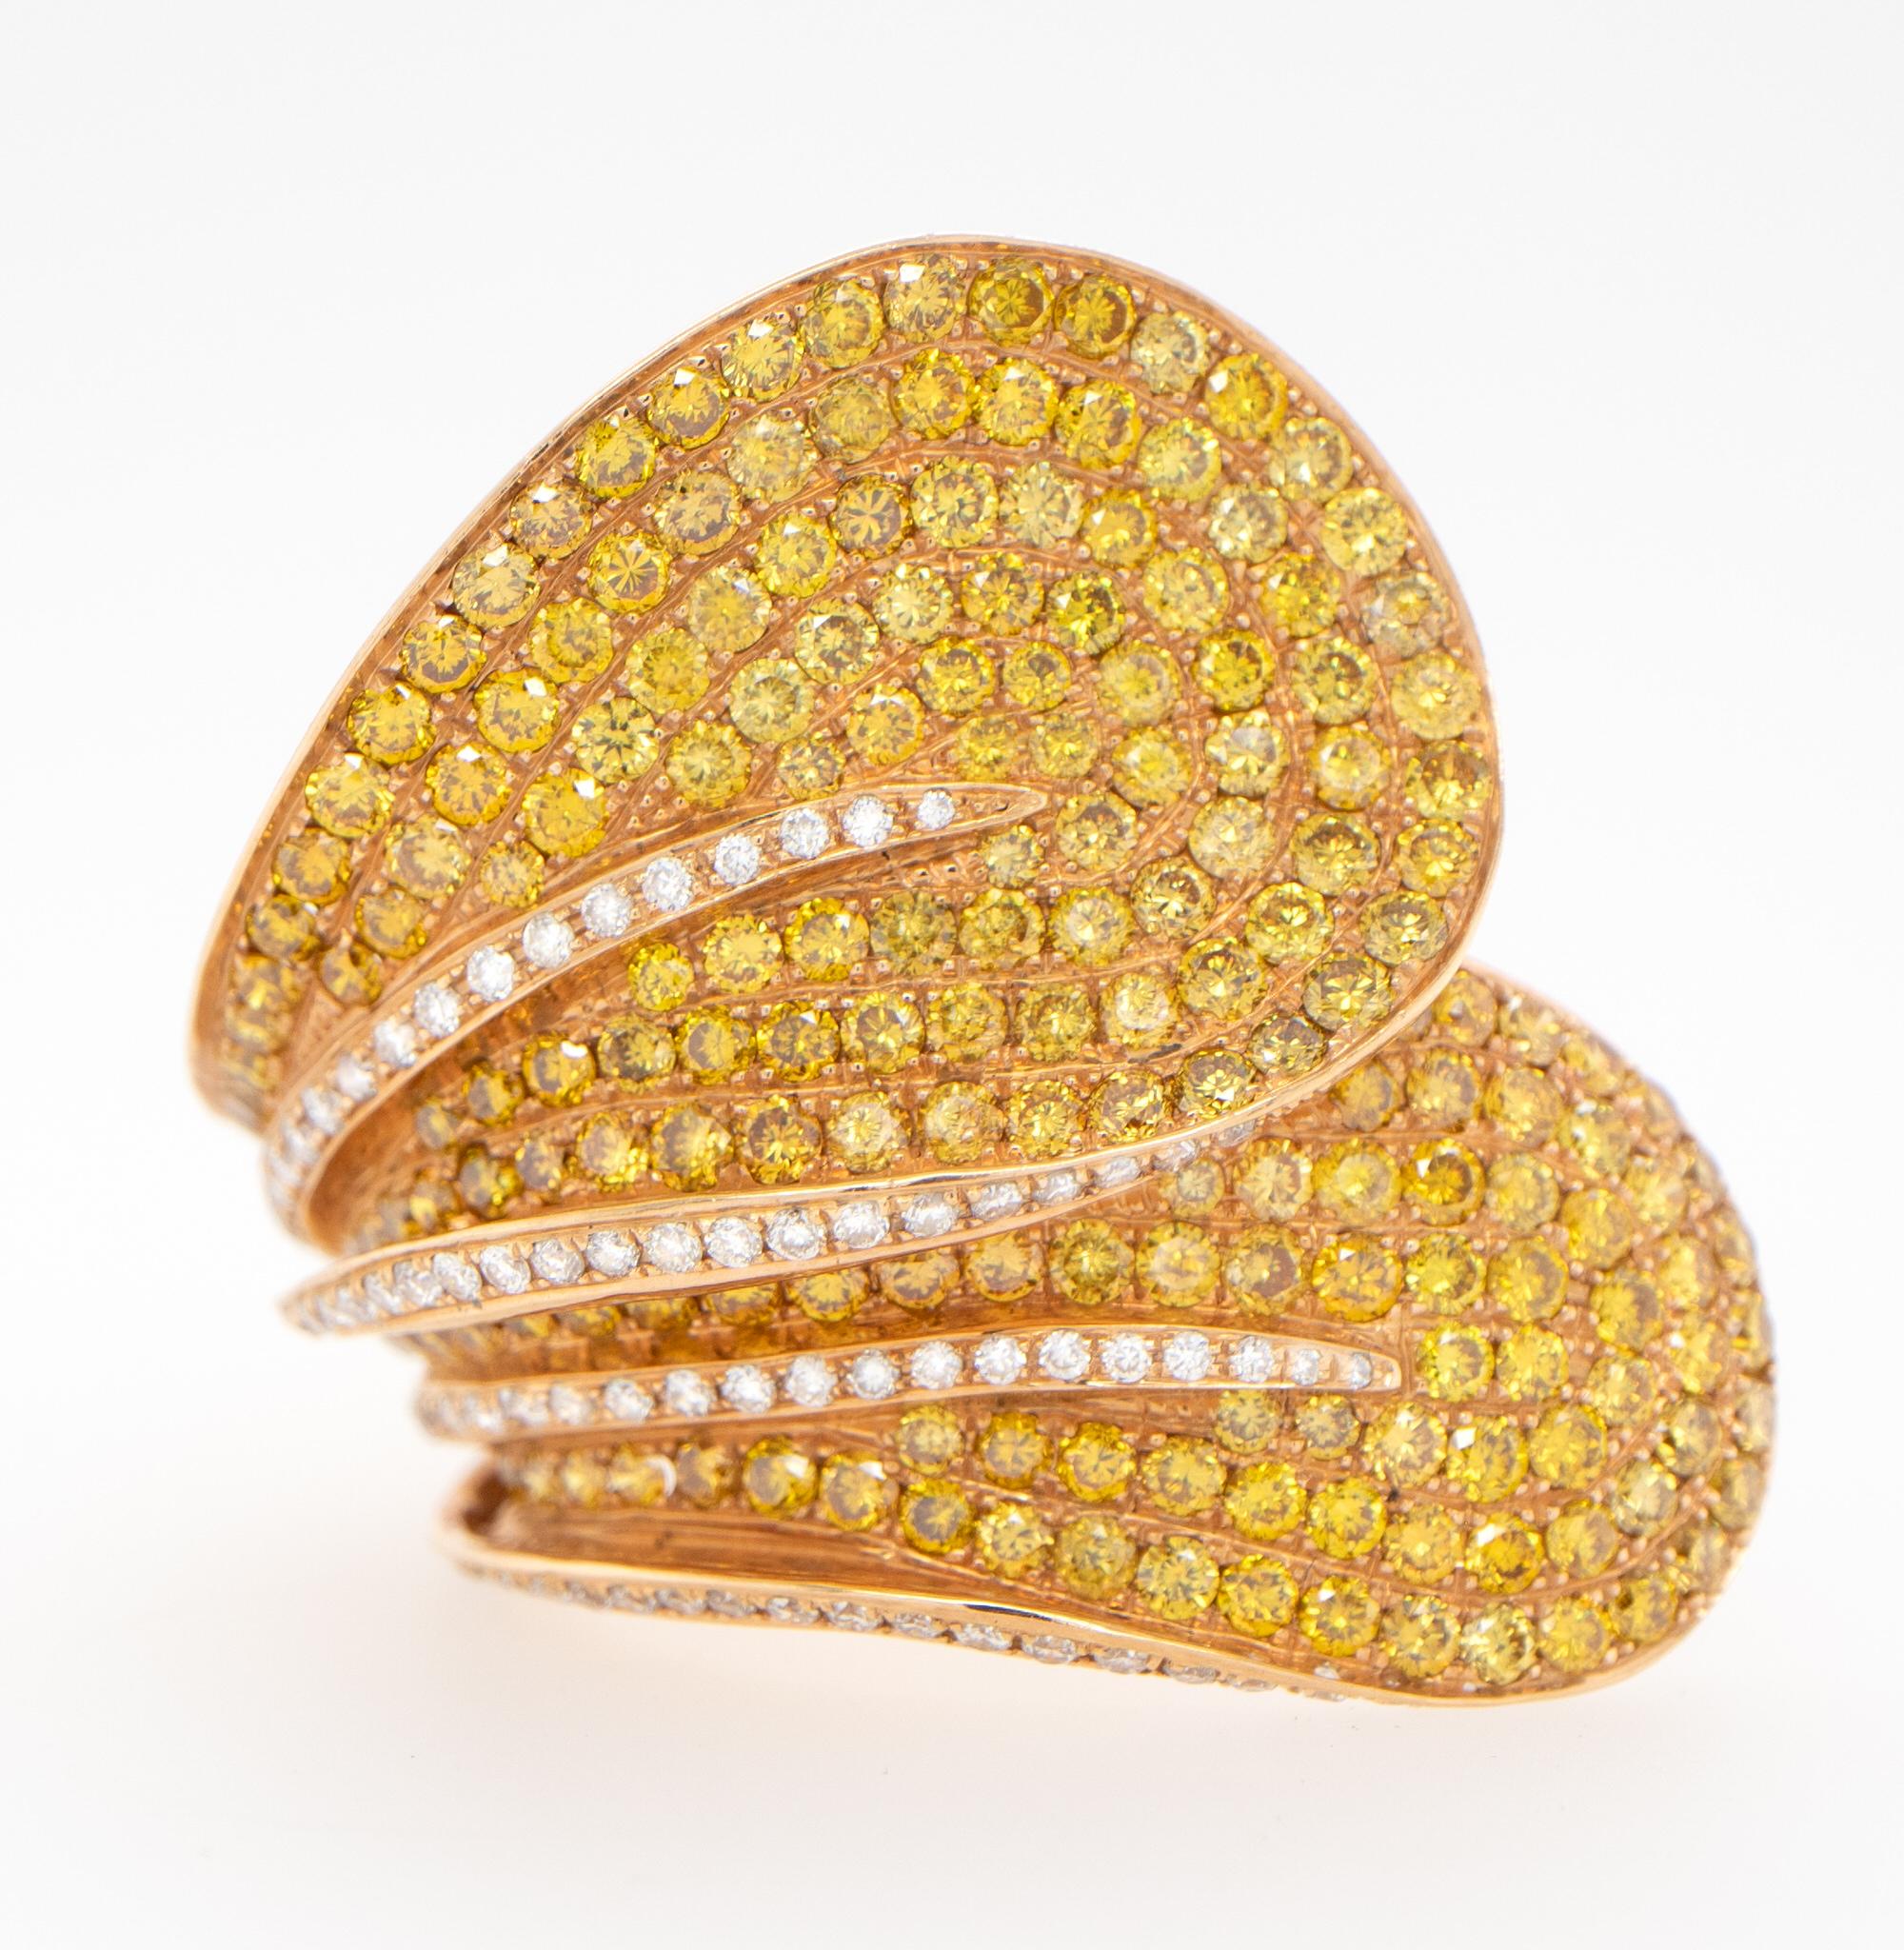 Fancy Yellow Diamond Leaf Cocktail Ring 3.7 Carats 18K Gold In Excellent Condition For Sale In Laguna Niguel, CA